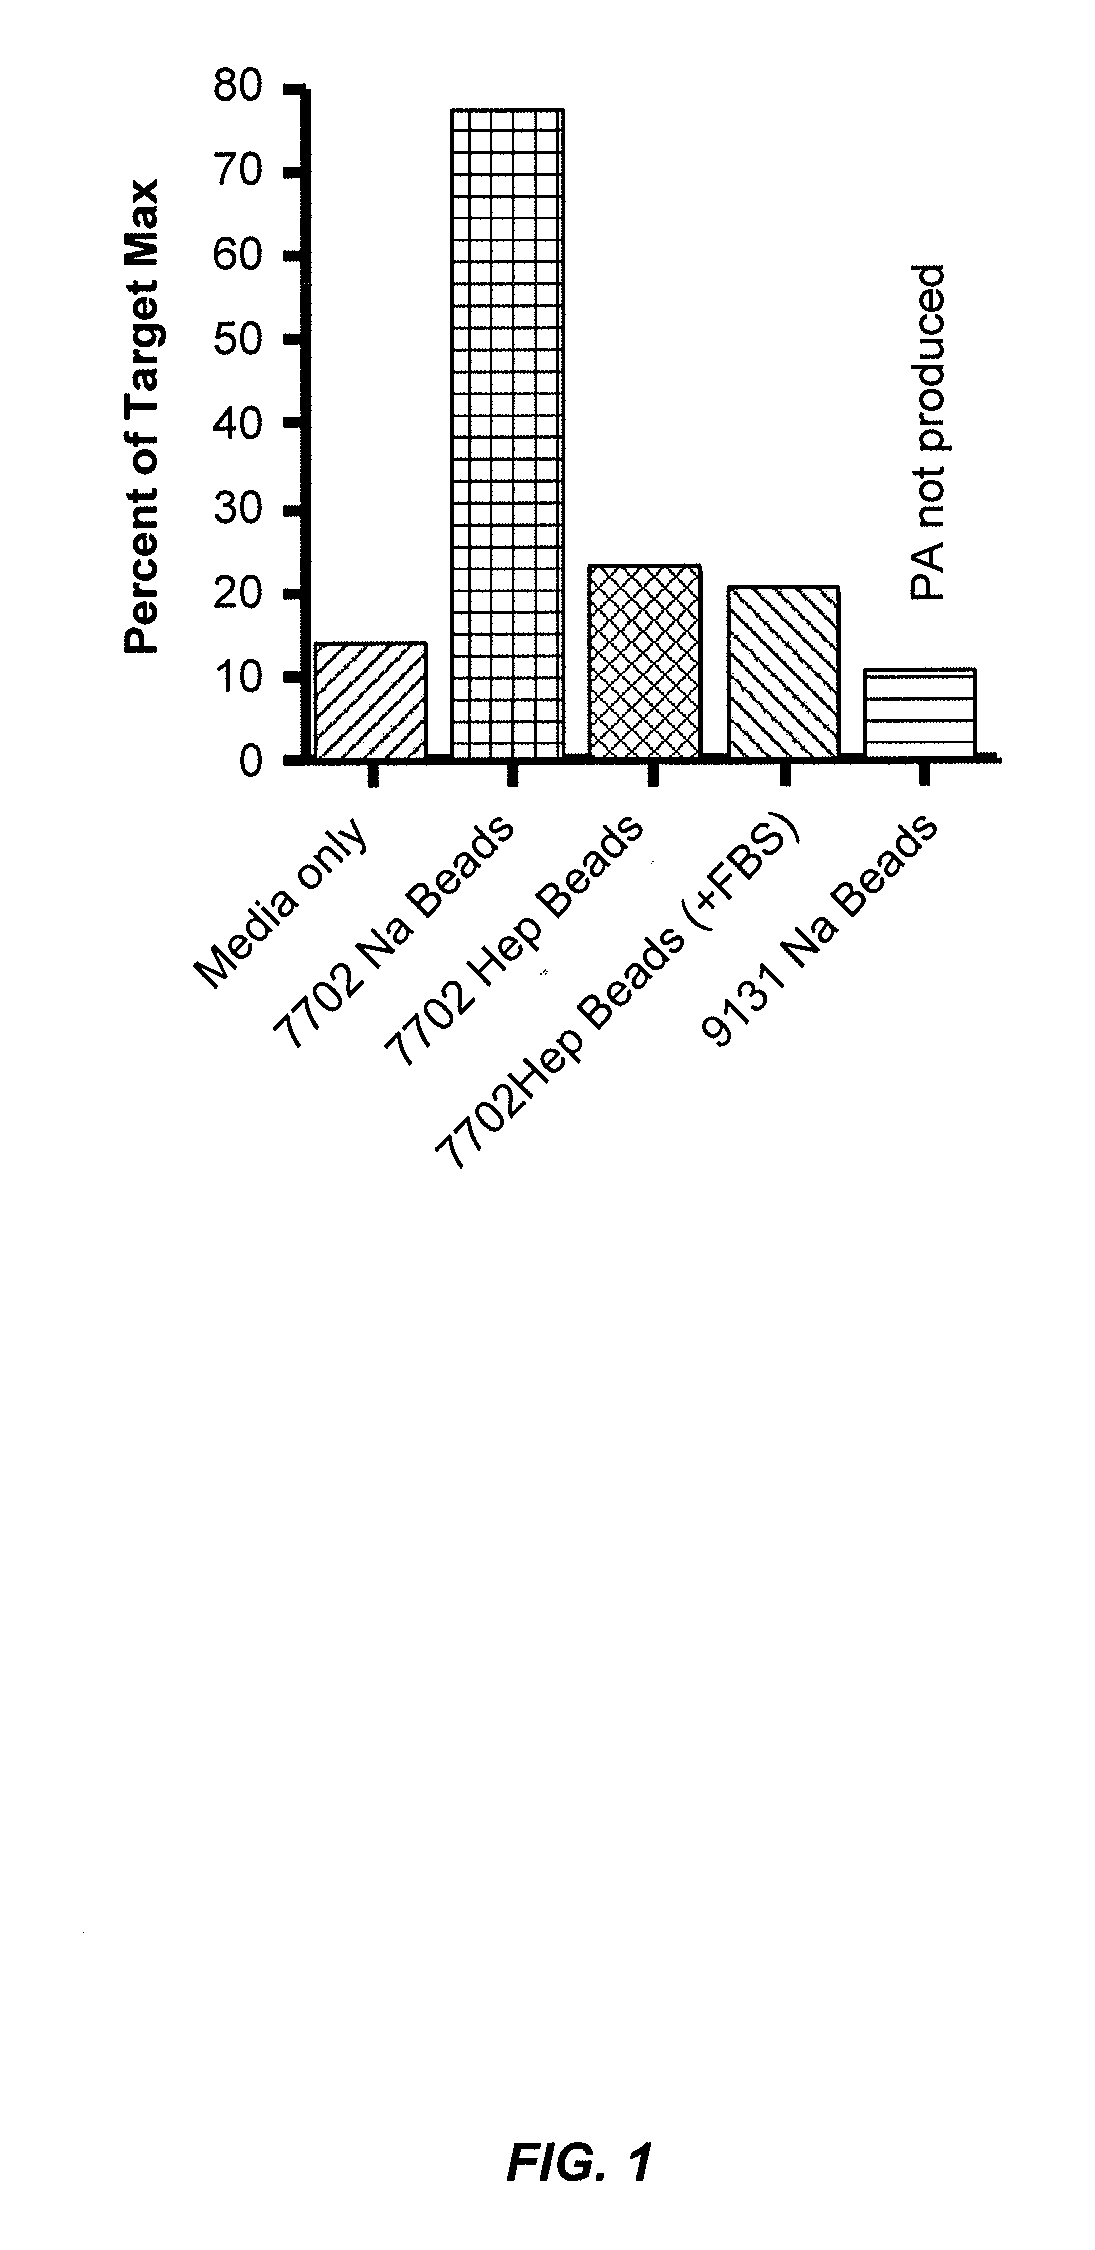 Blood filtration system containing mannose coated substrate